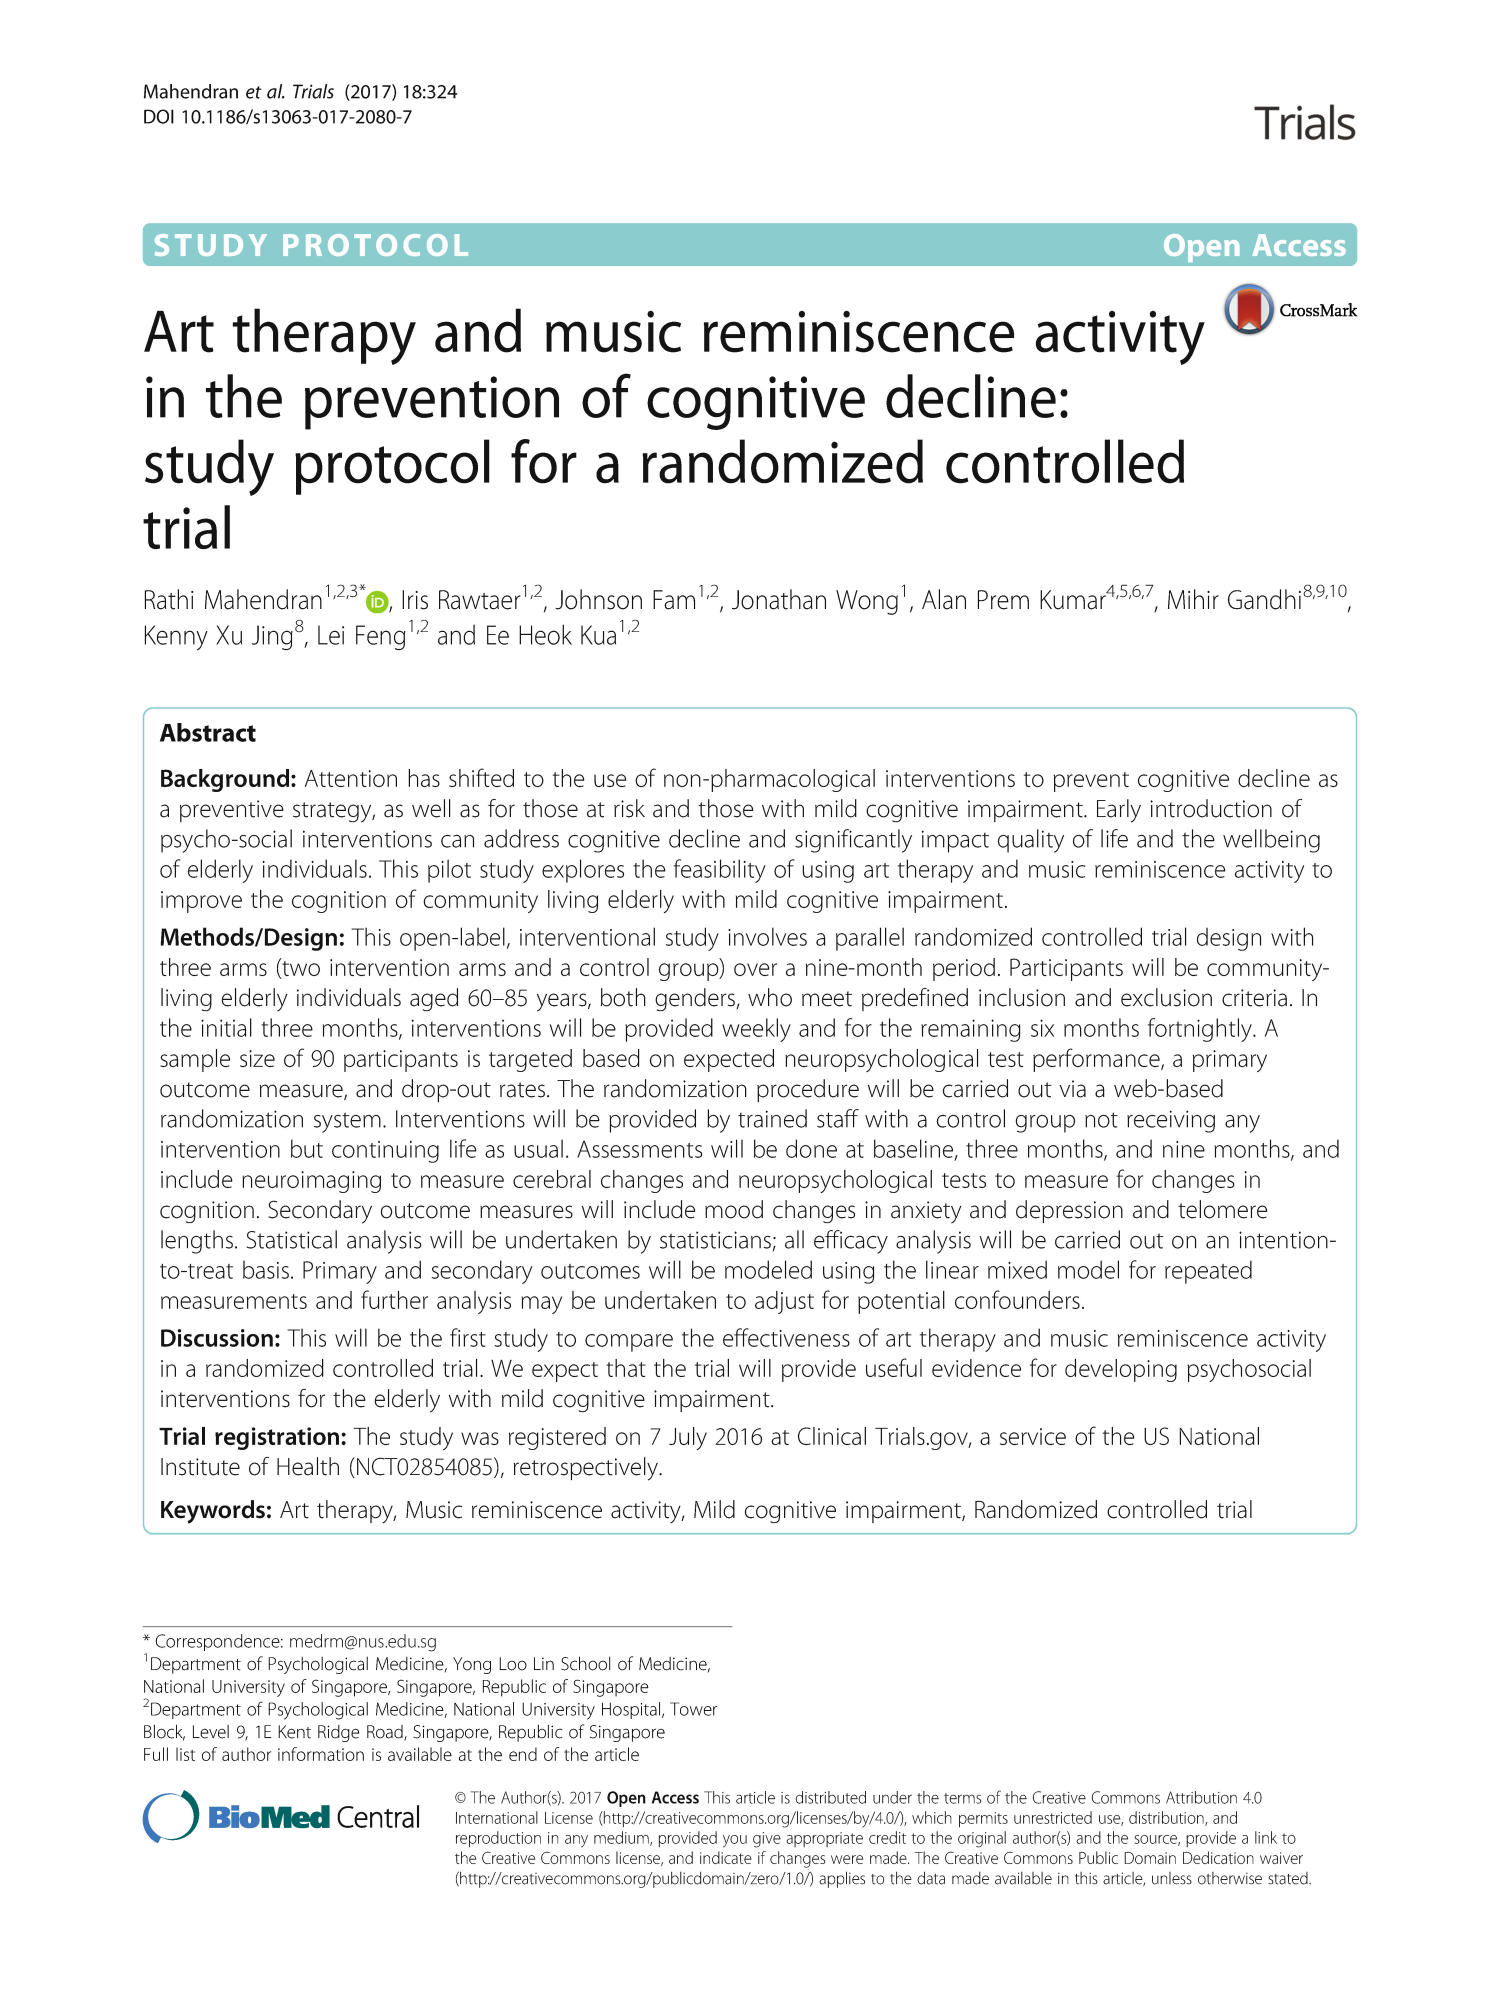 Art therapy and music reminiscence activity in the prevention of cognitive decline: study protocol for a randomized controlled trial
                                                
                                                    1
                                                